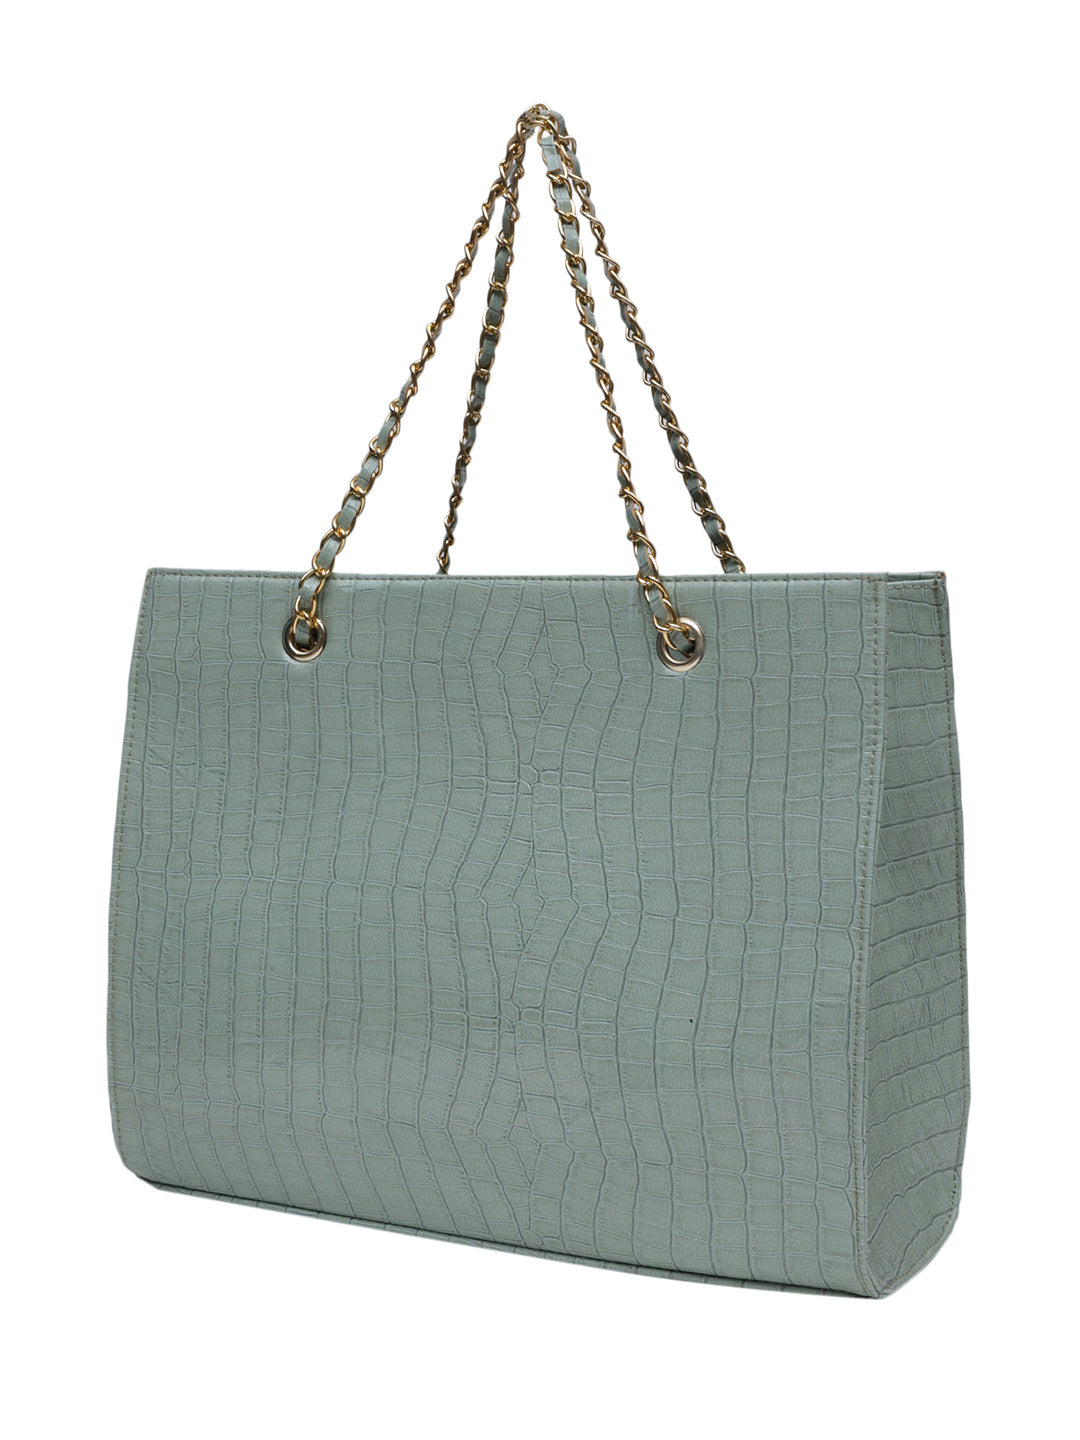 MINI WESST Green Casual Solid Tote Bag with Moblie Pouch(MWTB056GR)